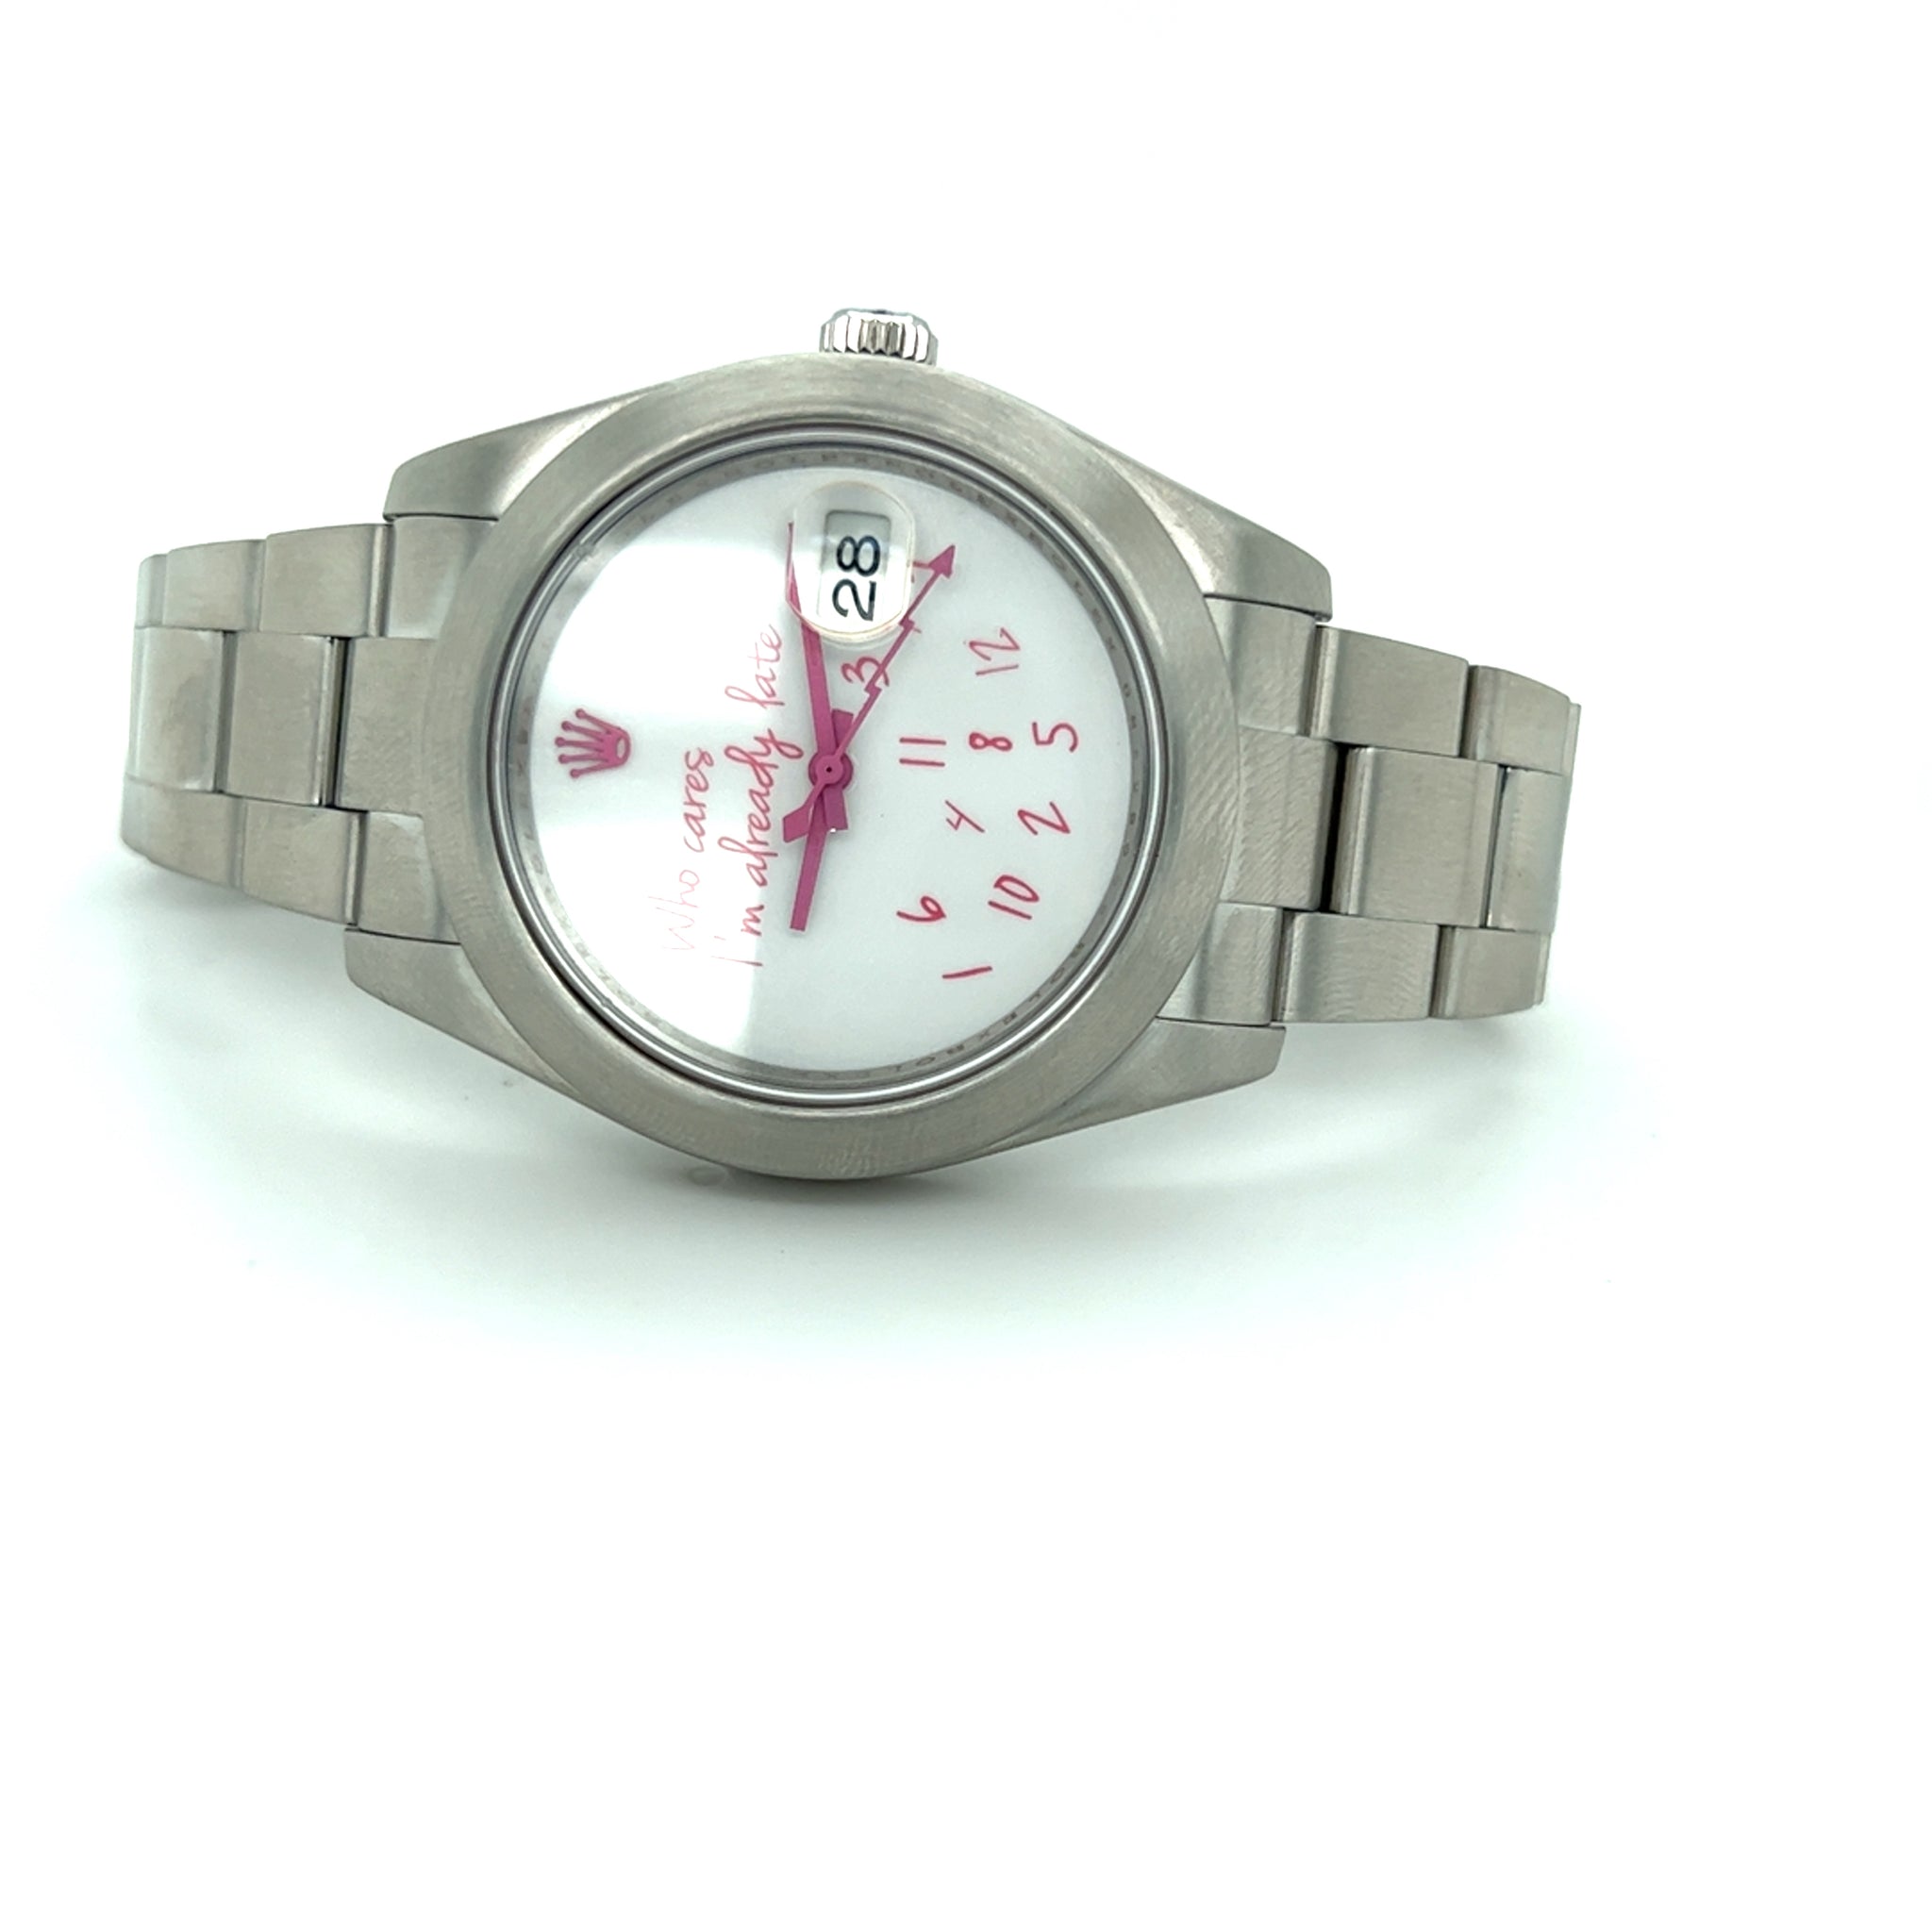 Exclusive 41mm Rolex Datejust "Who cares I'm already late" custom dial pink